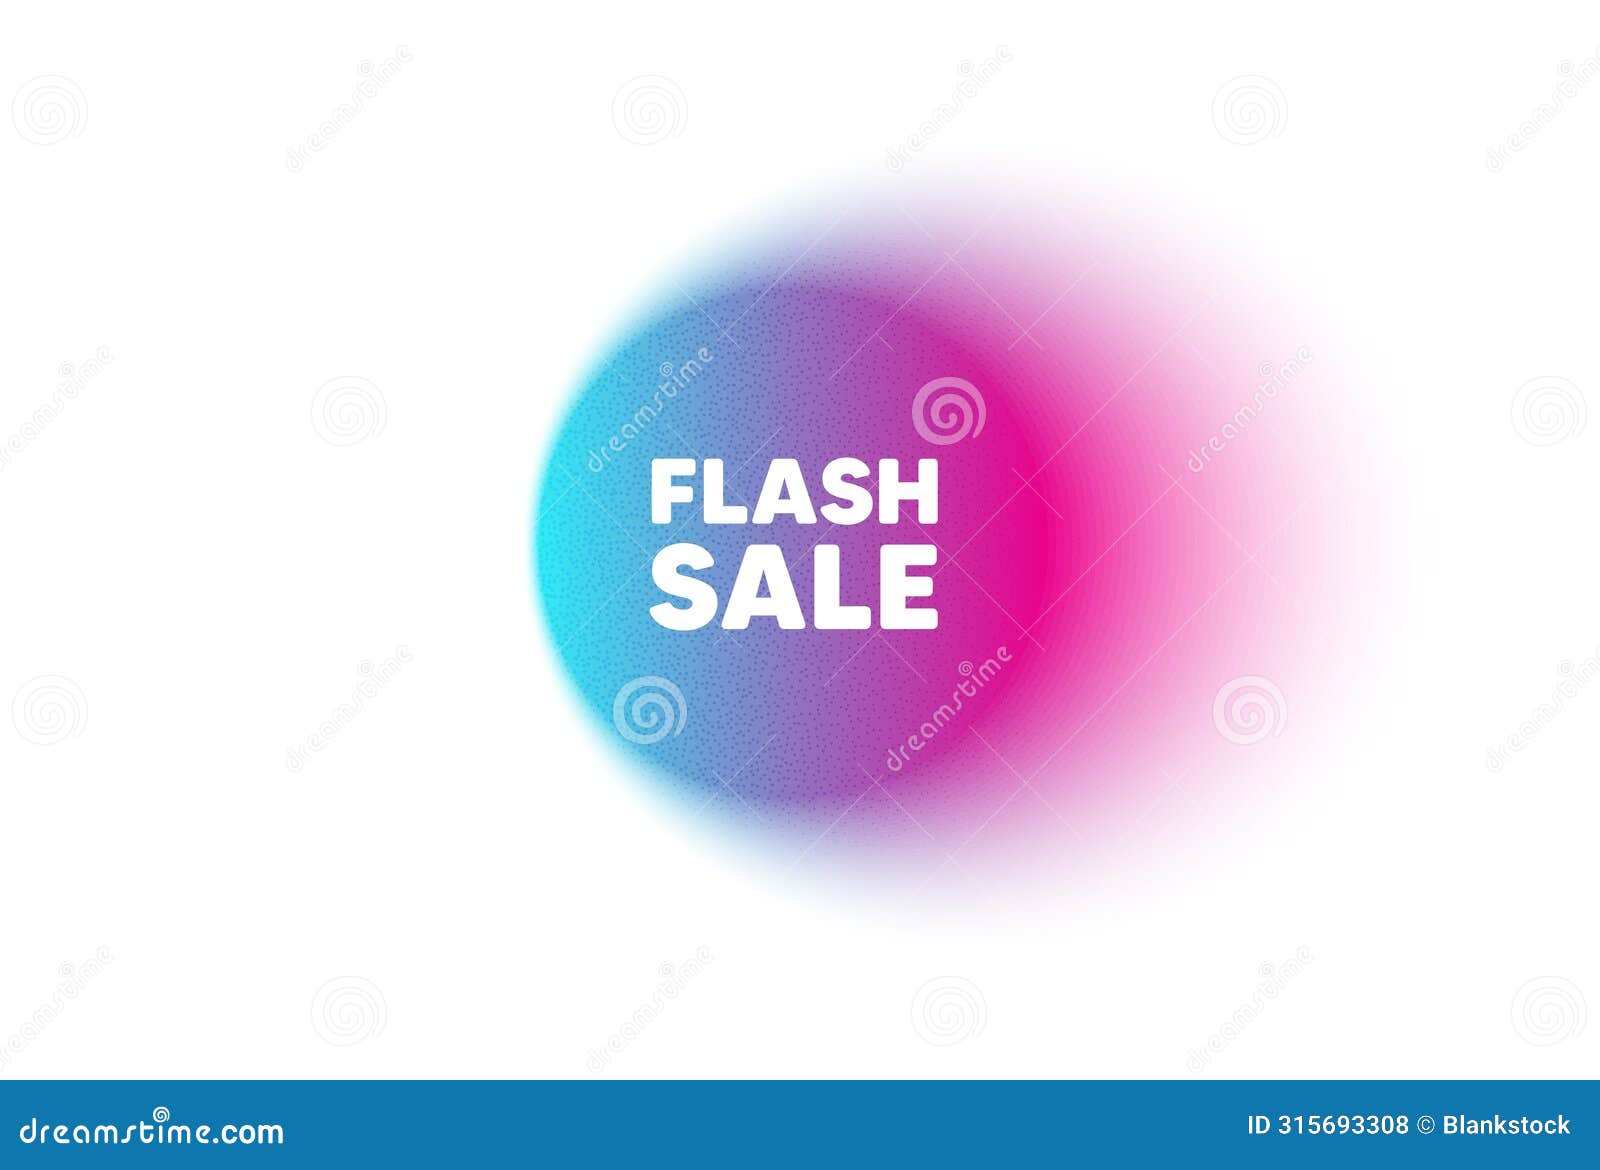 flash sale tag. special offer price sign. color neon gradient circle banner. 